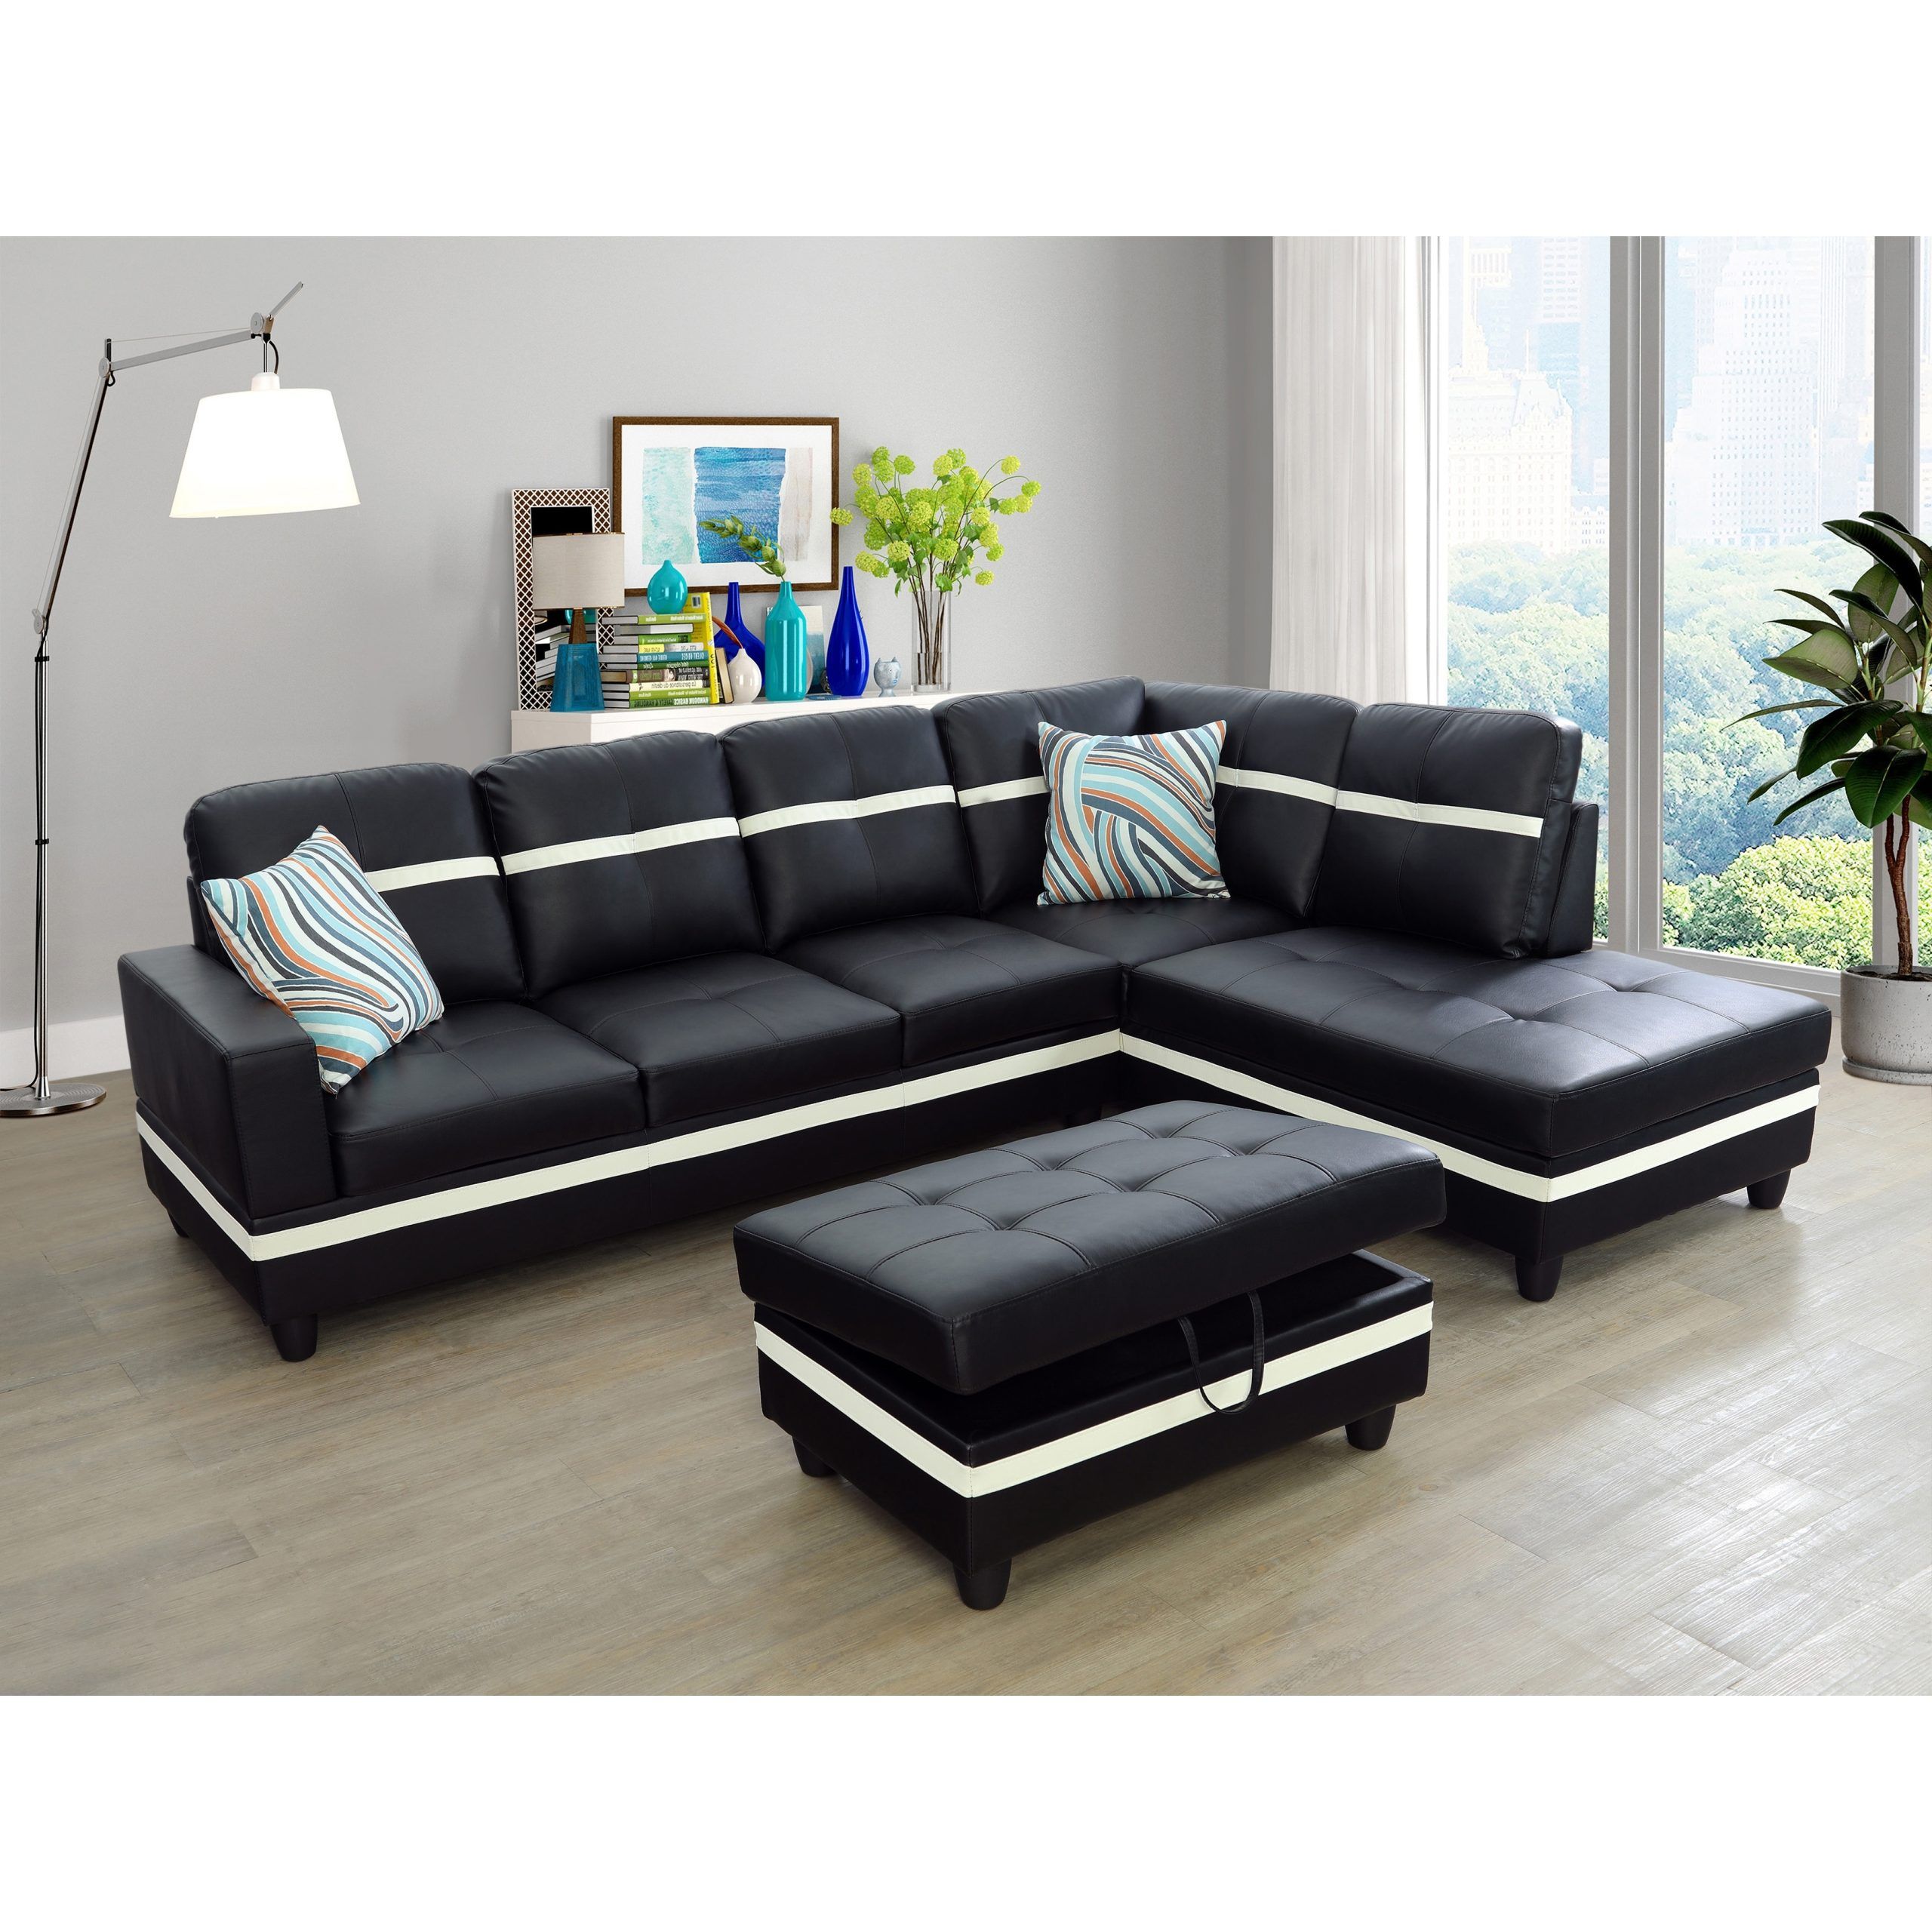 Black Right Facing 3 Piece Sectional Sofa(9511b) – On Sale – Bed Bath &  Beyond – 33560690 Inside Right Facing Black Sofas (View 14 of 15)